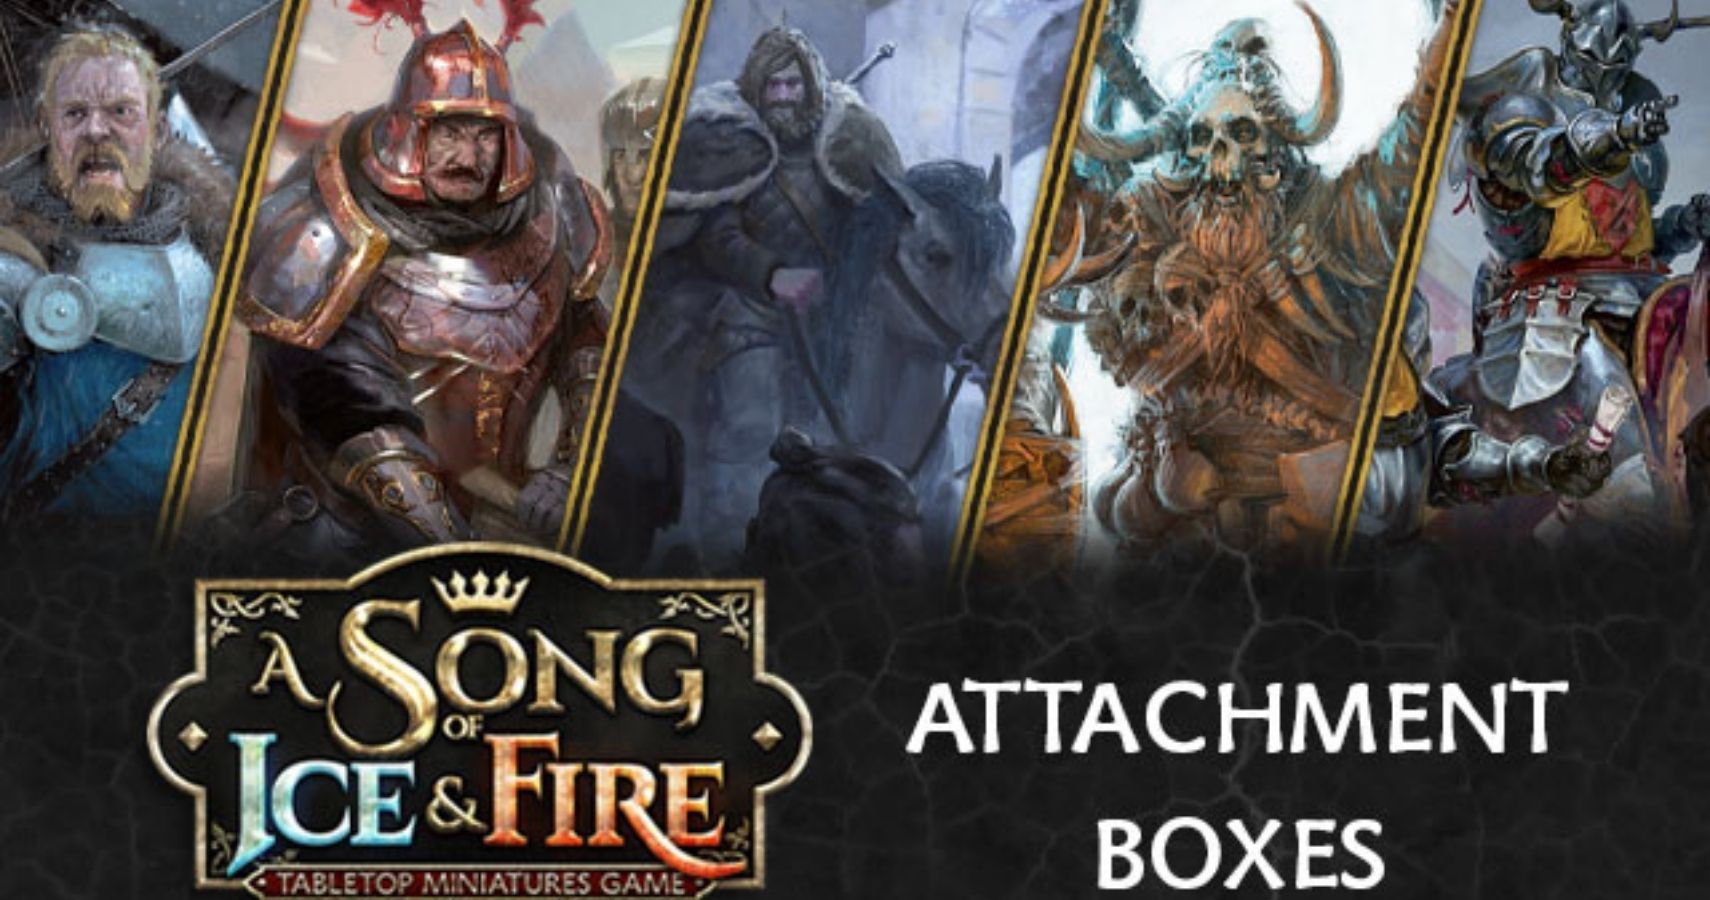 A Song of Ice and Fire Attachment Boxes feature image